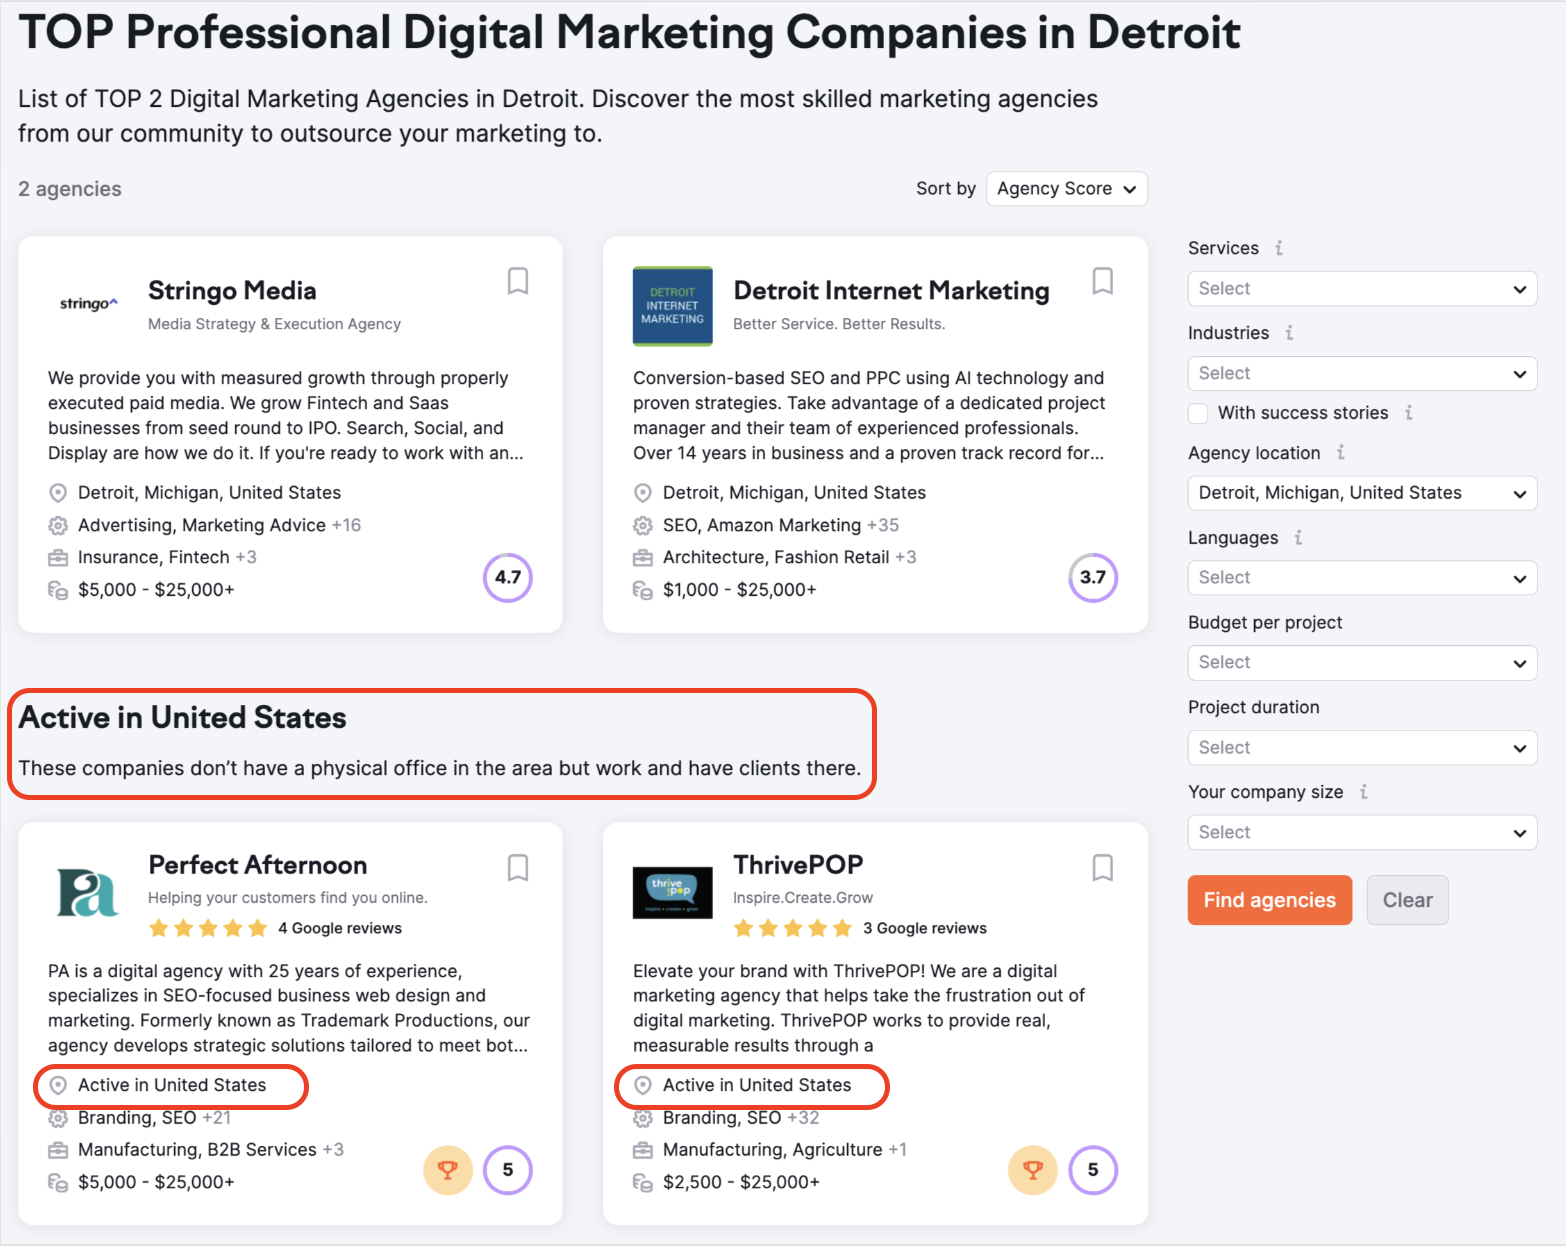 A list of Digital Agencies located in Detroit including those that don't have office but have clients in the United States. They are listed after the 'Active in United States' title (highlighted with a red rectangle).